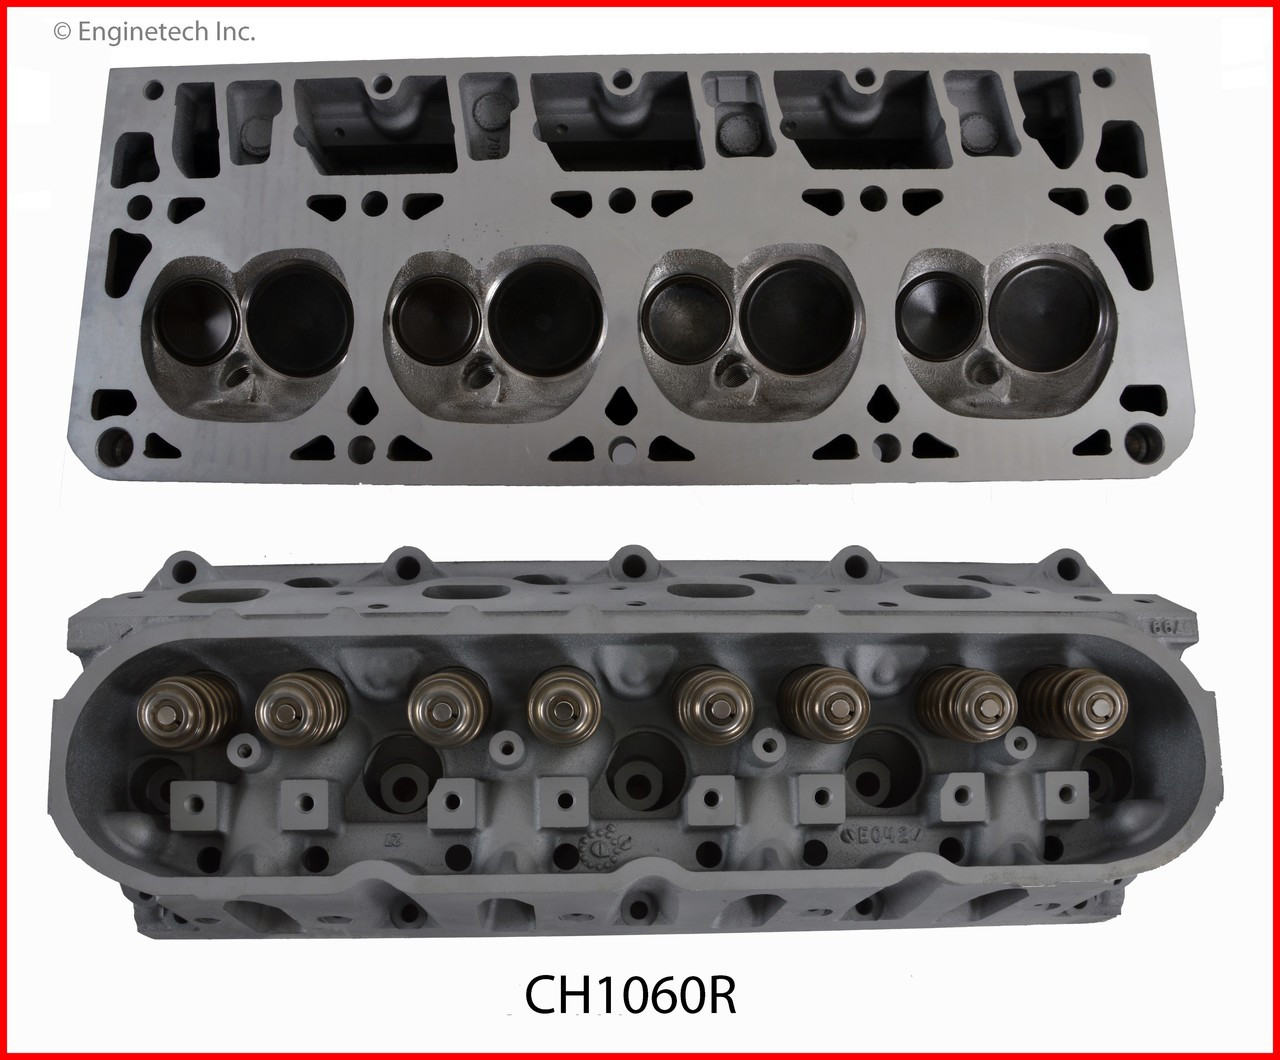 Cylinder Head Assembly - 2008 Buick LaCrosse 5.3L (CH1060R.K199)